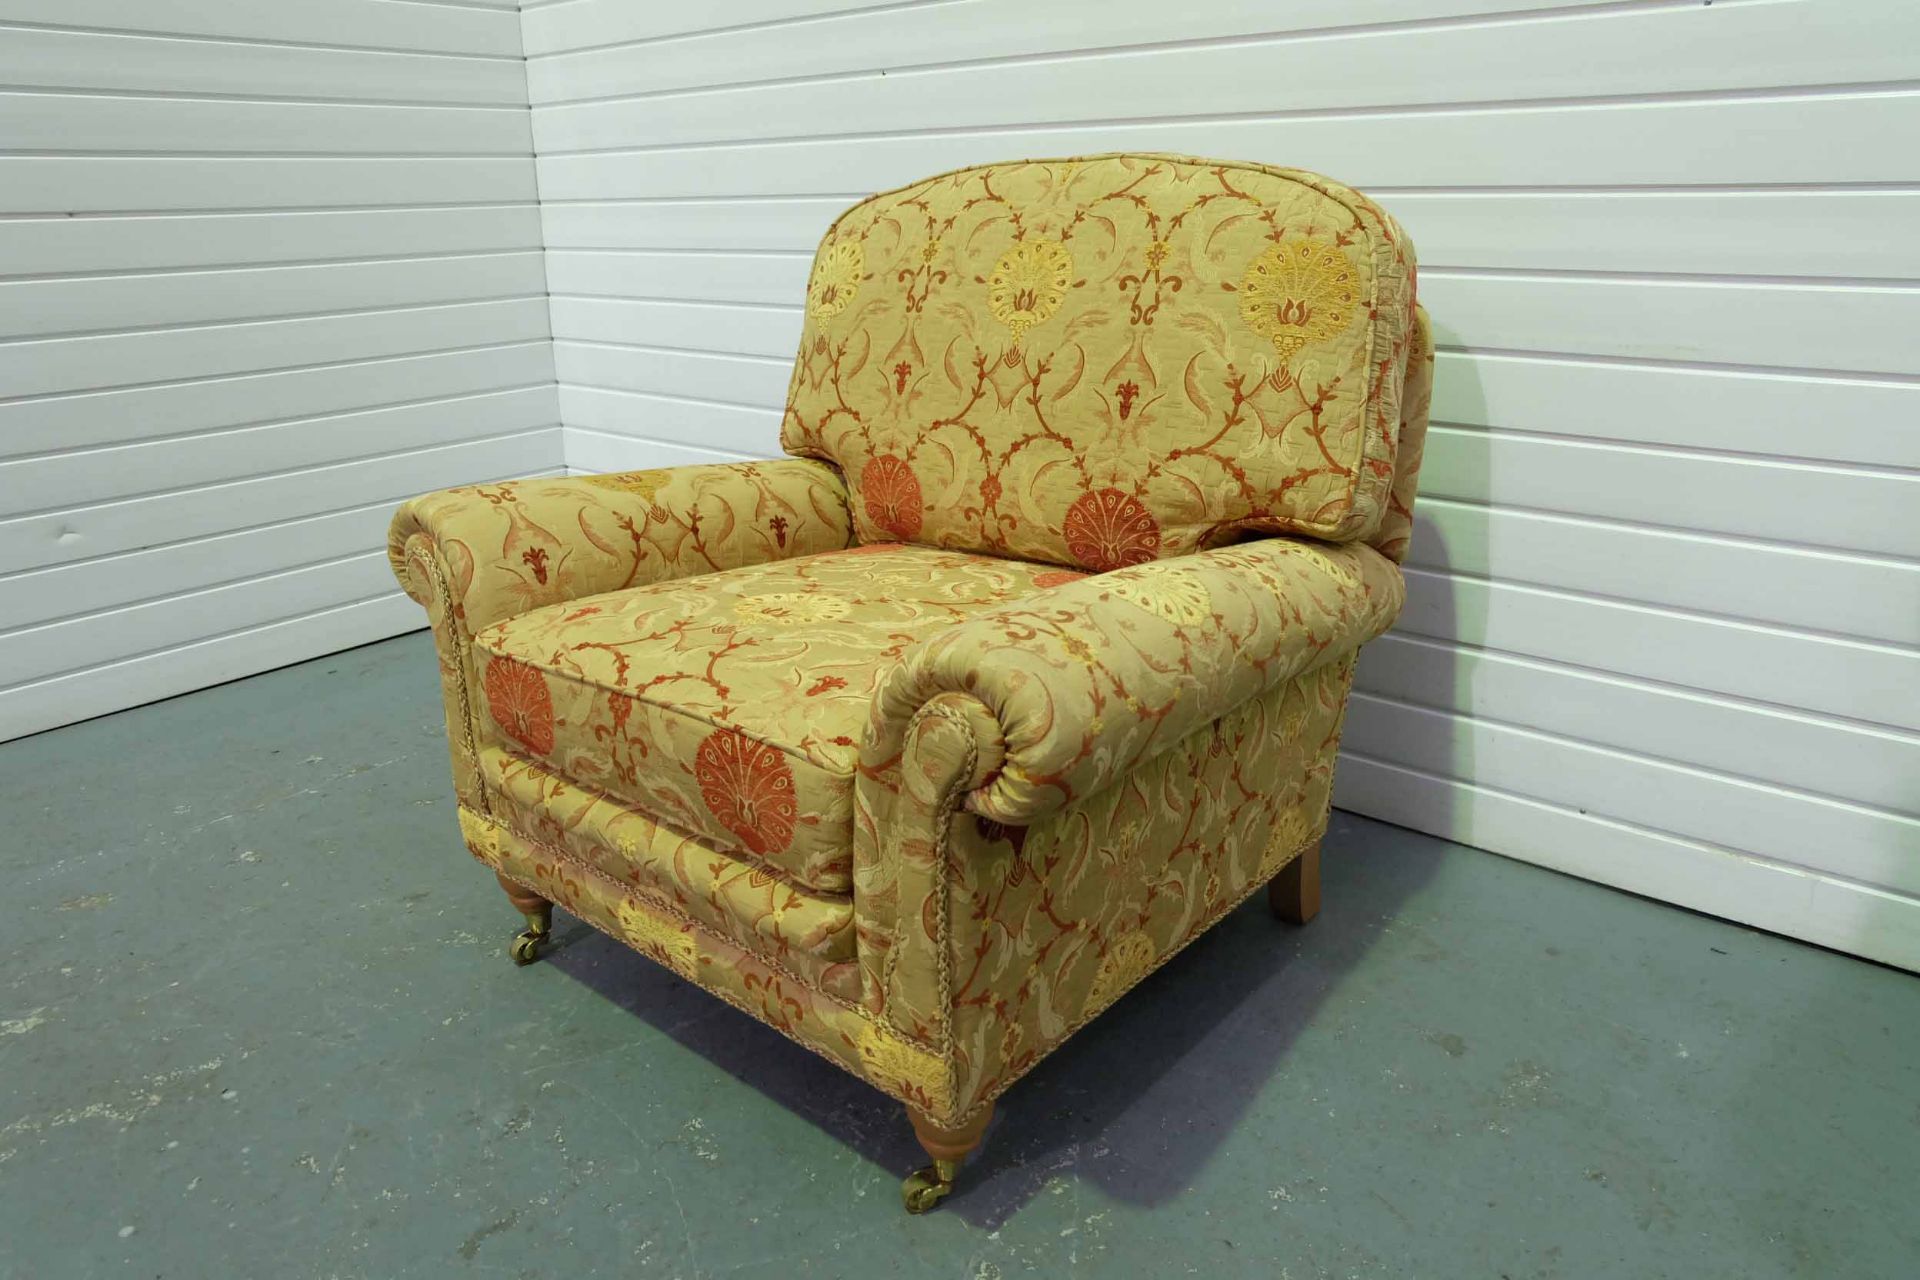 Steed Upholstery 'Lincoln' Range Fully Handmade Chair. Castor Wheels to the Front of the Chair. In - Image 2 of 4